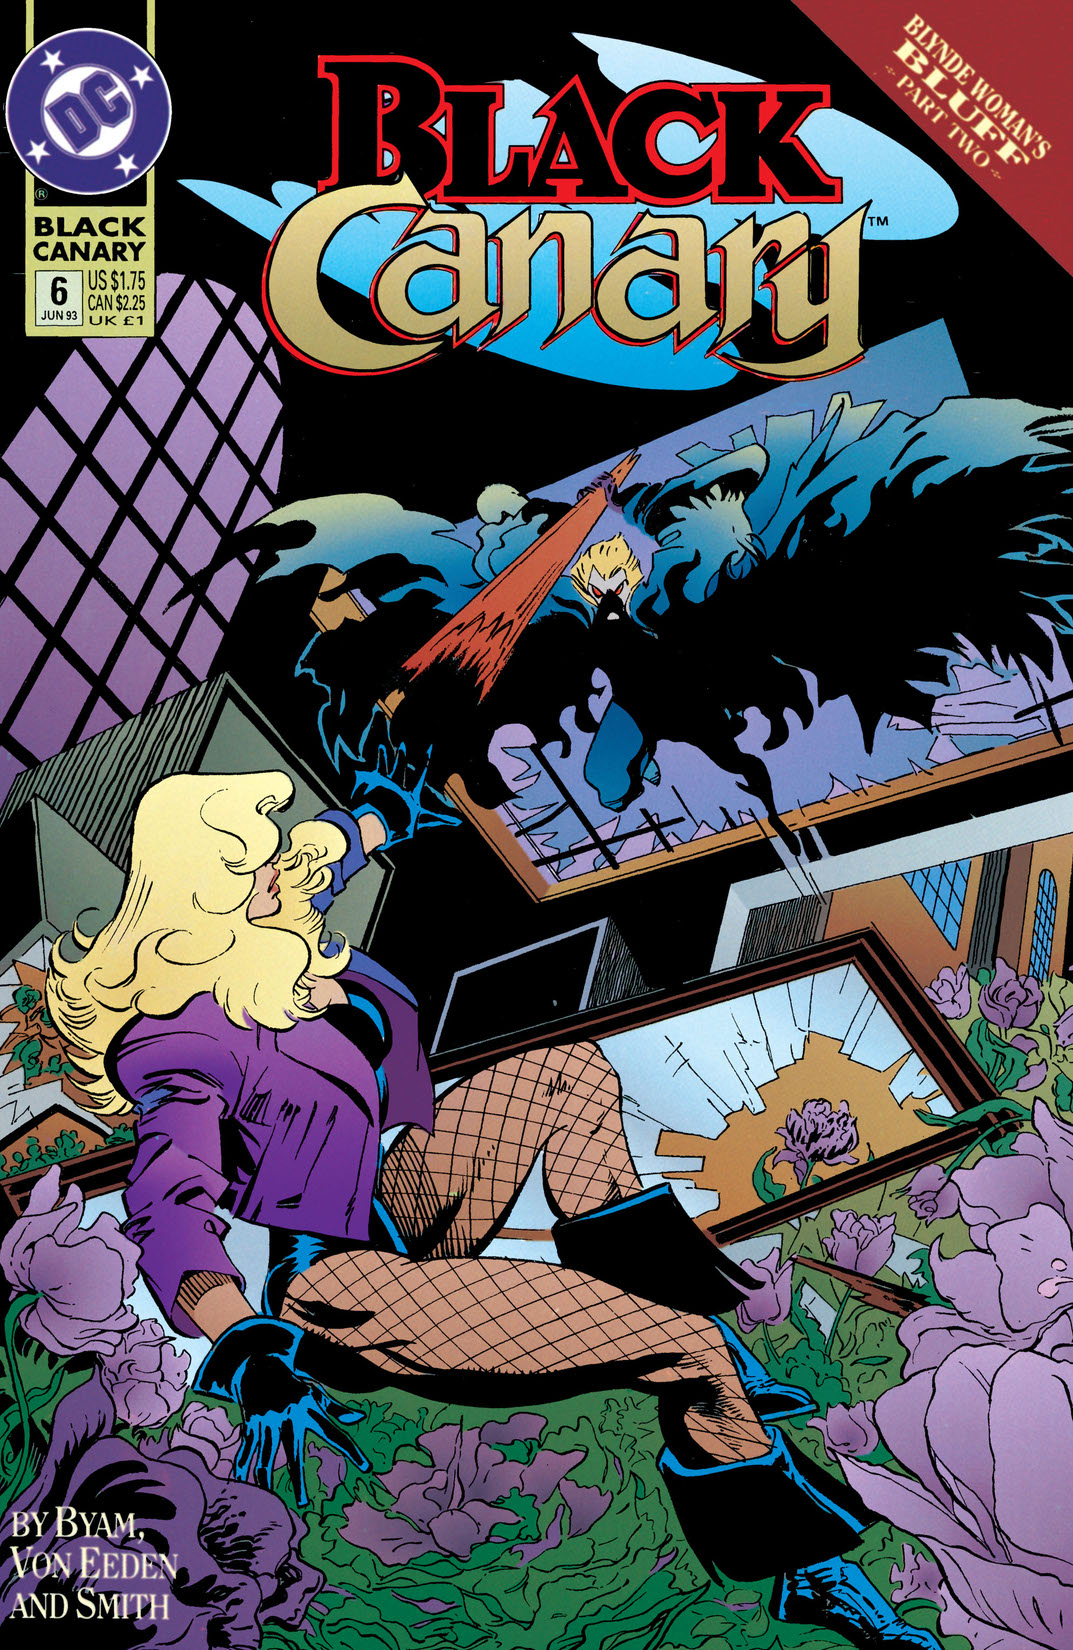 Black Canary (1992-) #6 preview images